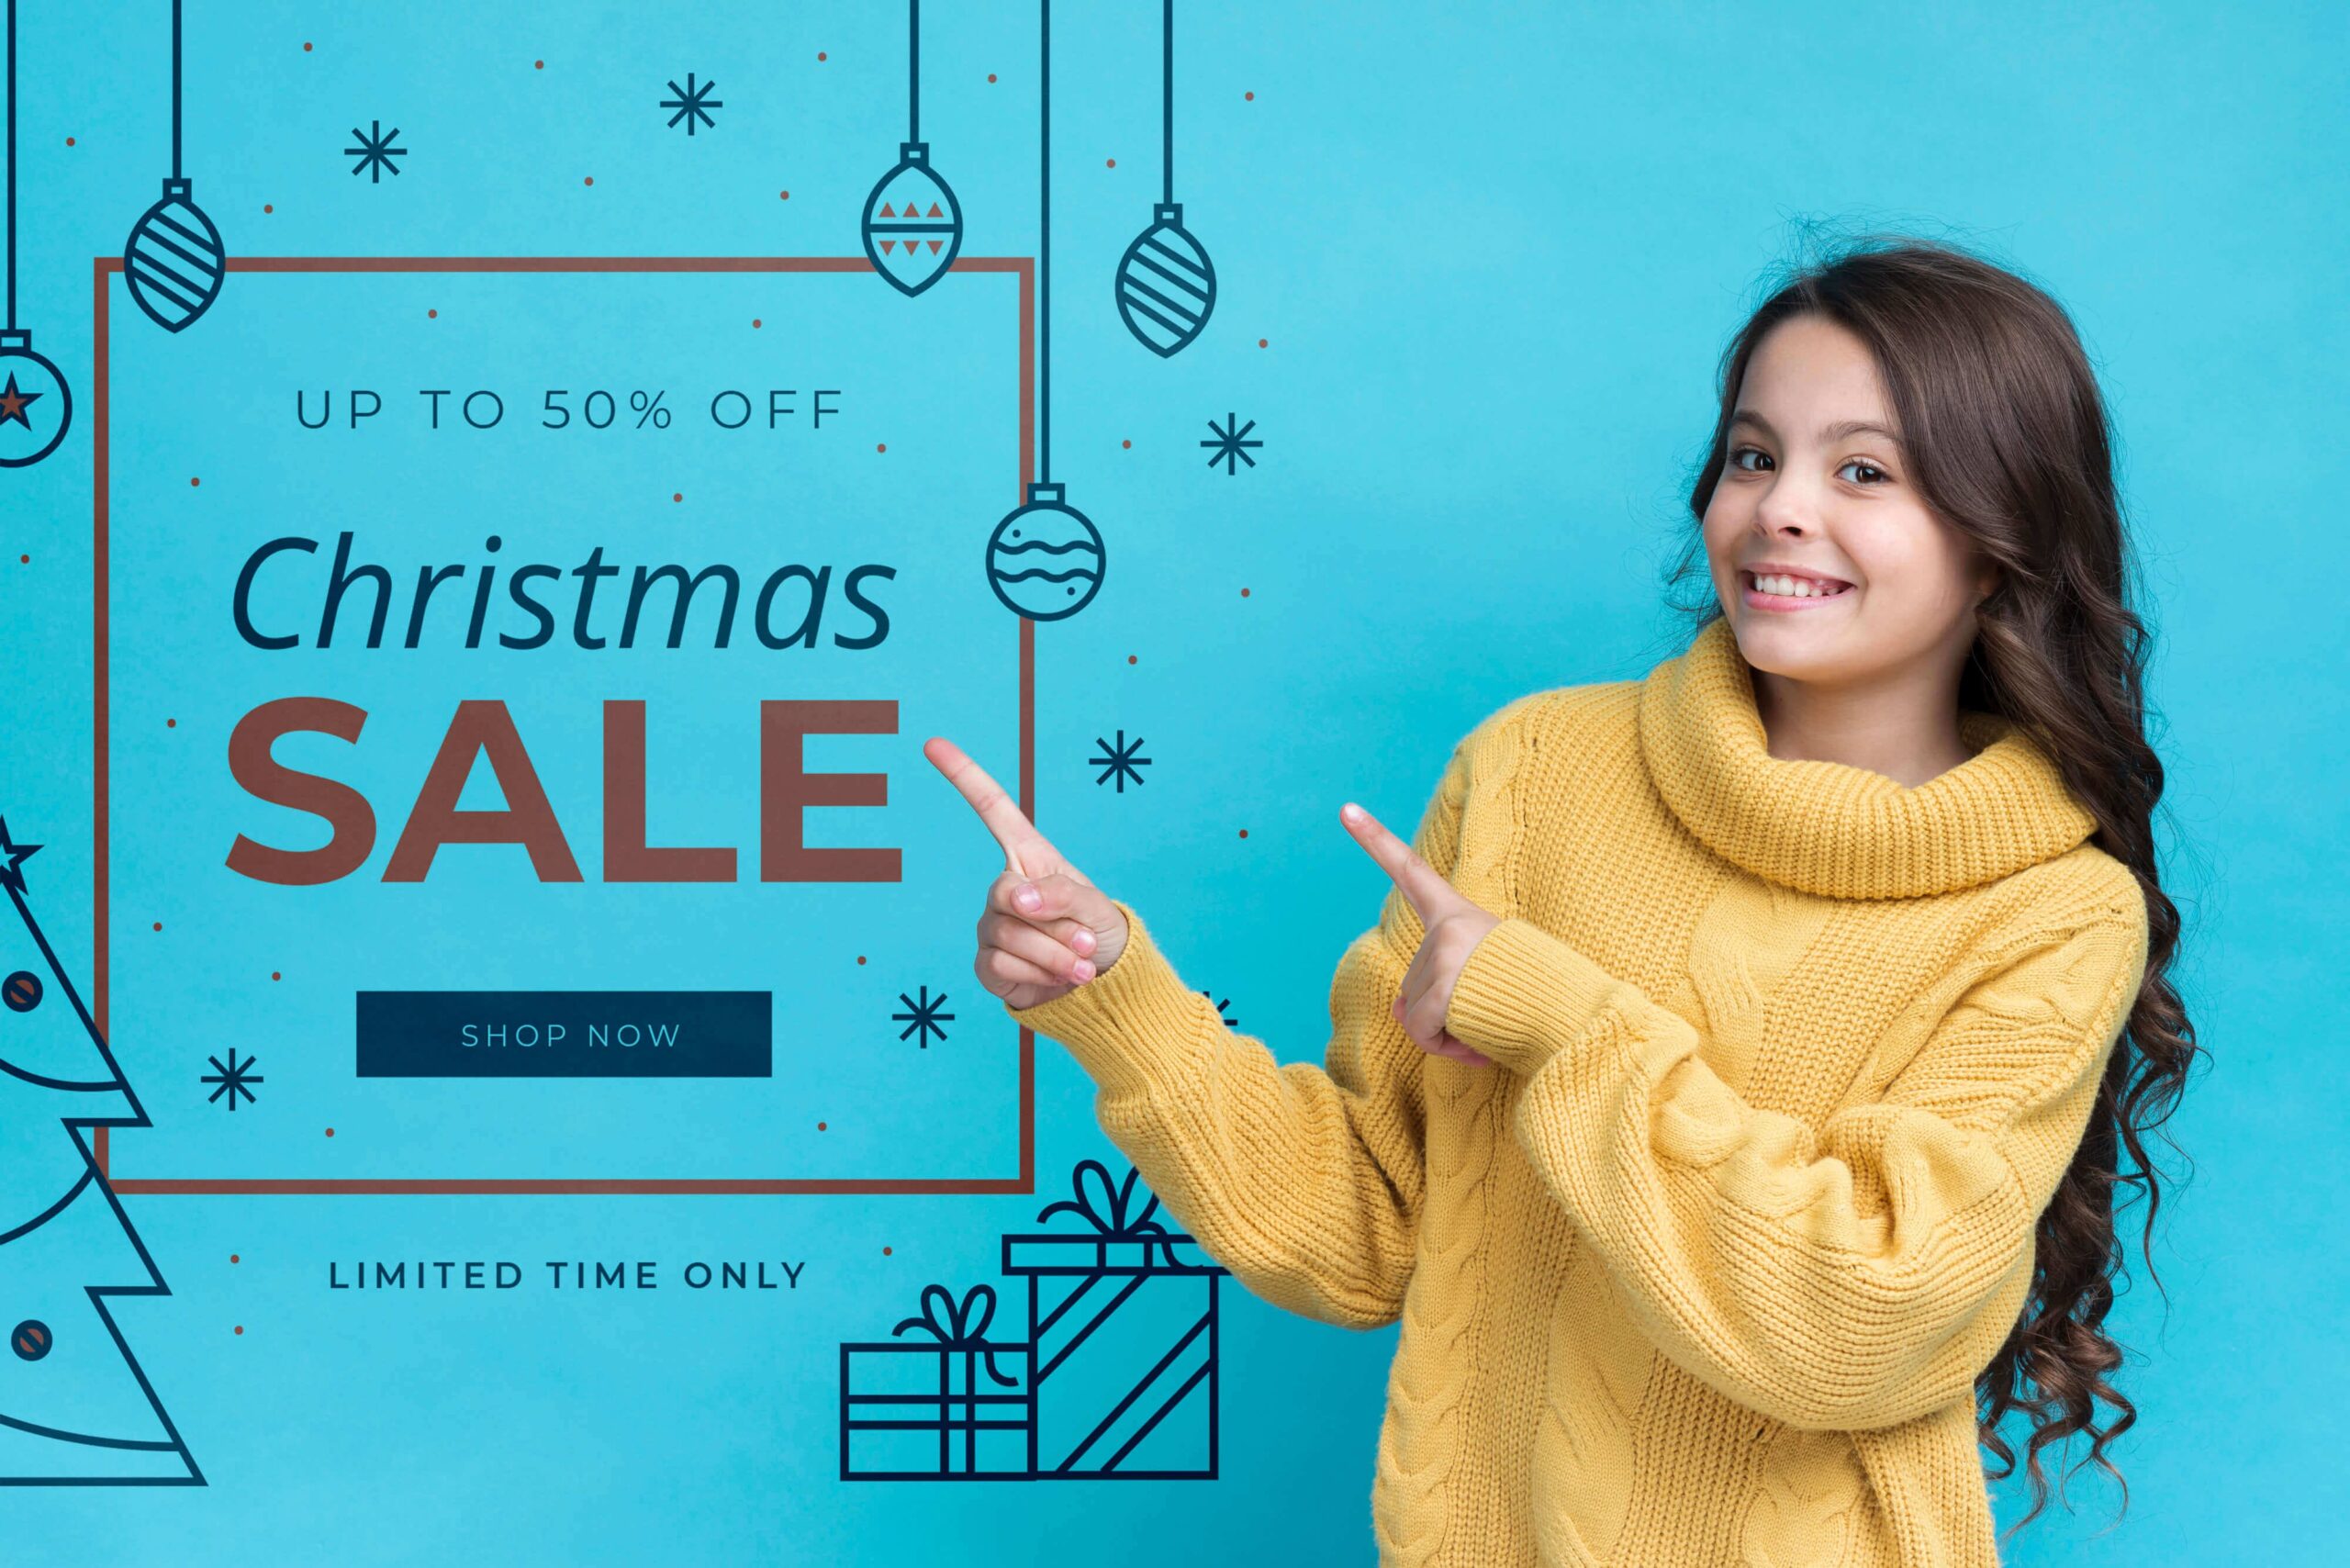 Optimize Your Christmas Marketing Campaign With These 5 Strategies